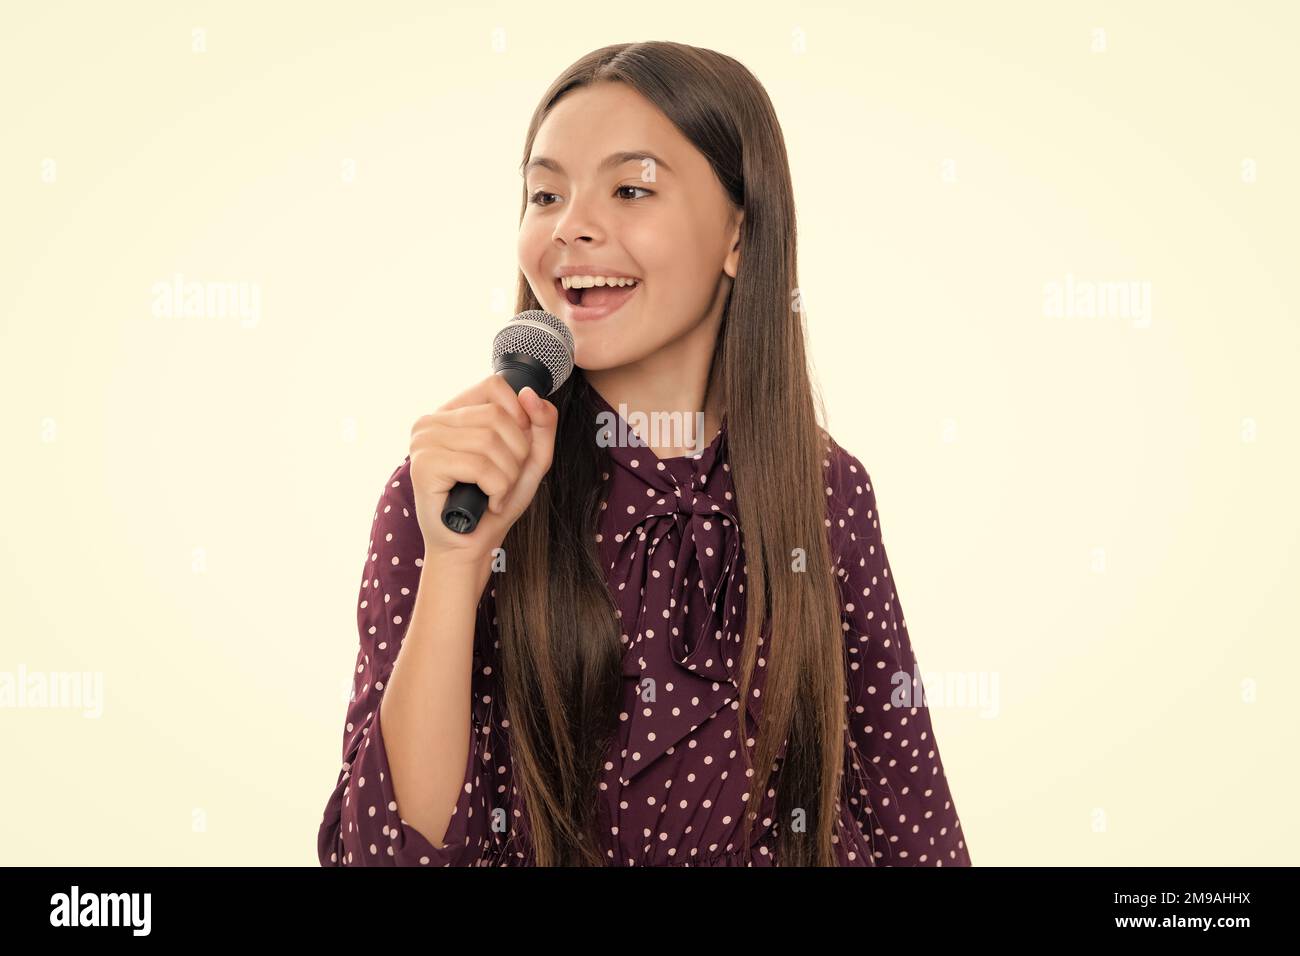 Kid singing. Emotional amazed teen girl with microphone singing against white background. Singing lovely singer girl hold microphone. Stock Photo